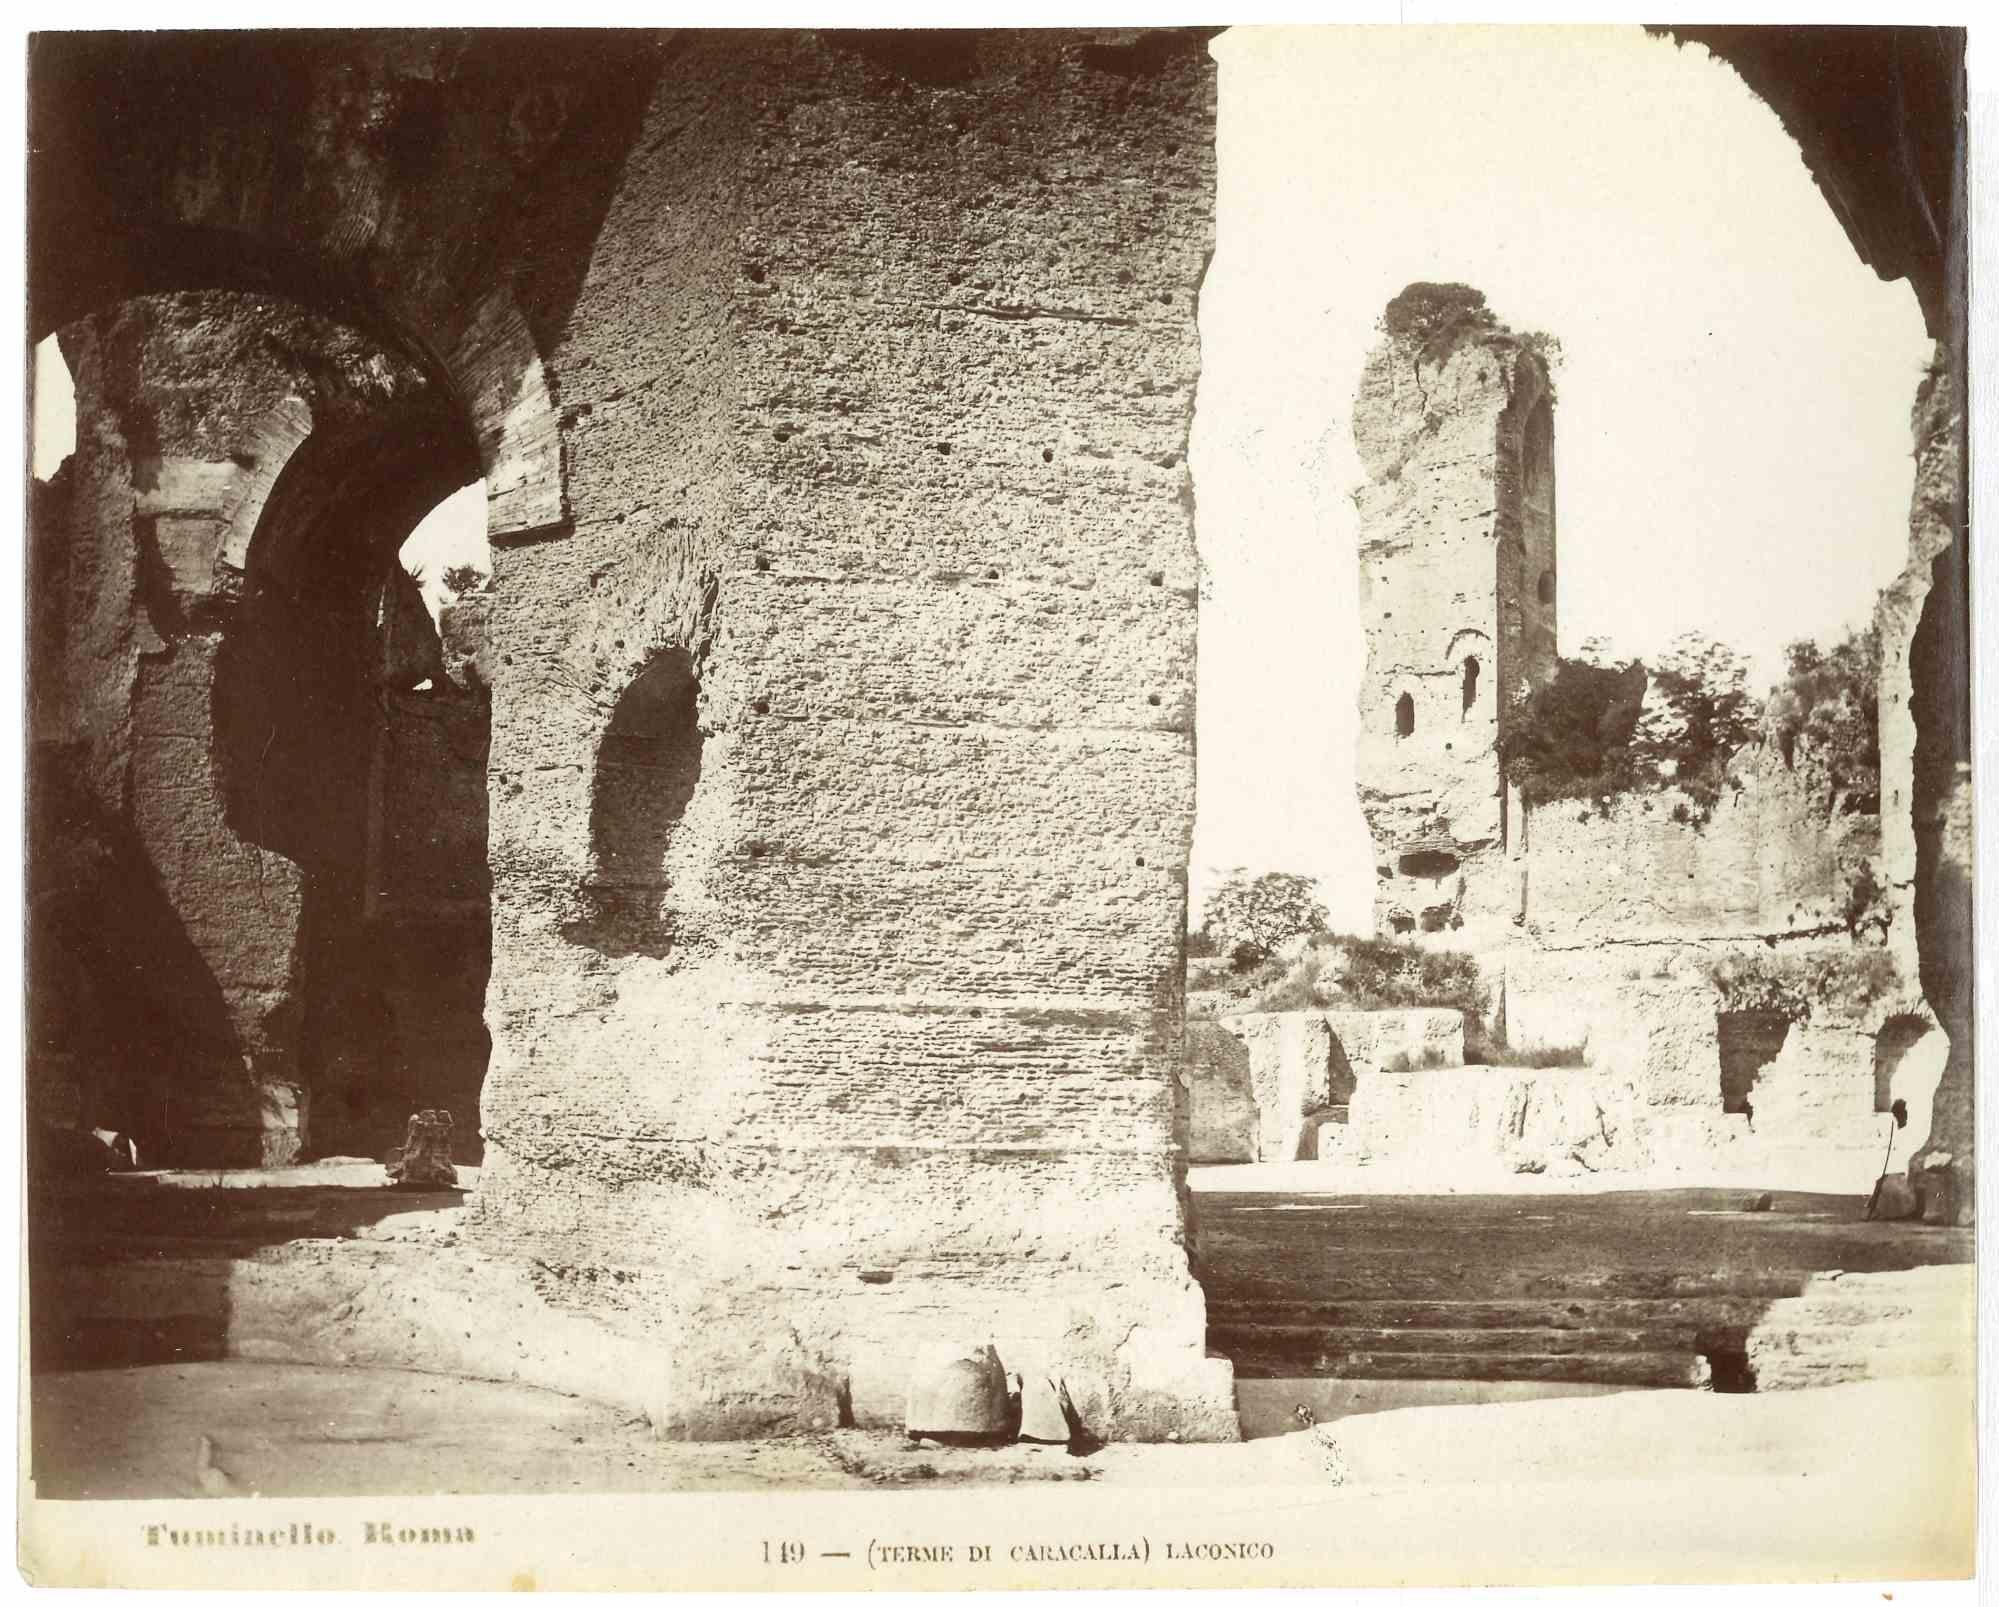 Baths of Caracalla is a vintage print in salt silver realized by Ludovico Tuminello in the early 20th Century.

Titled on the lower.

Good conditions except for some foxing.